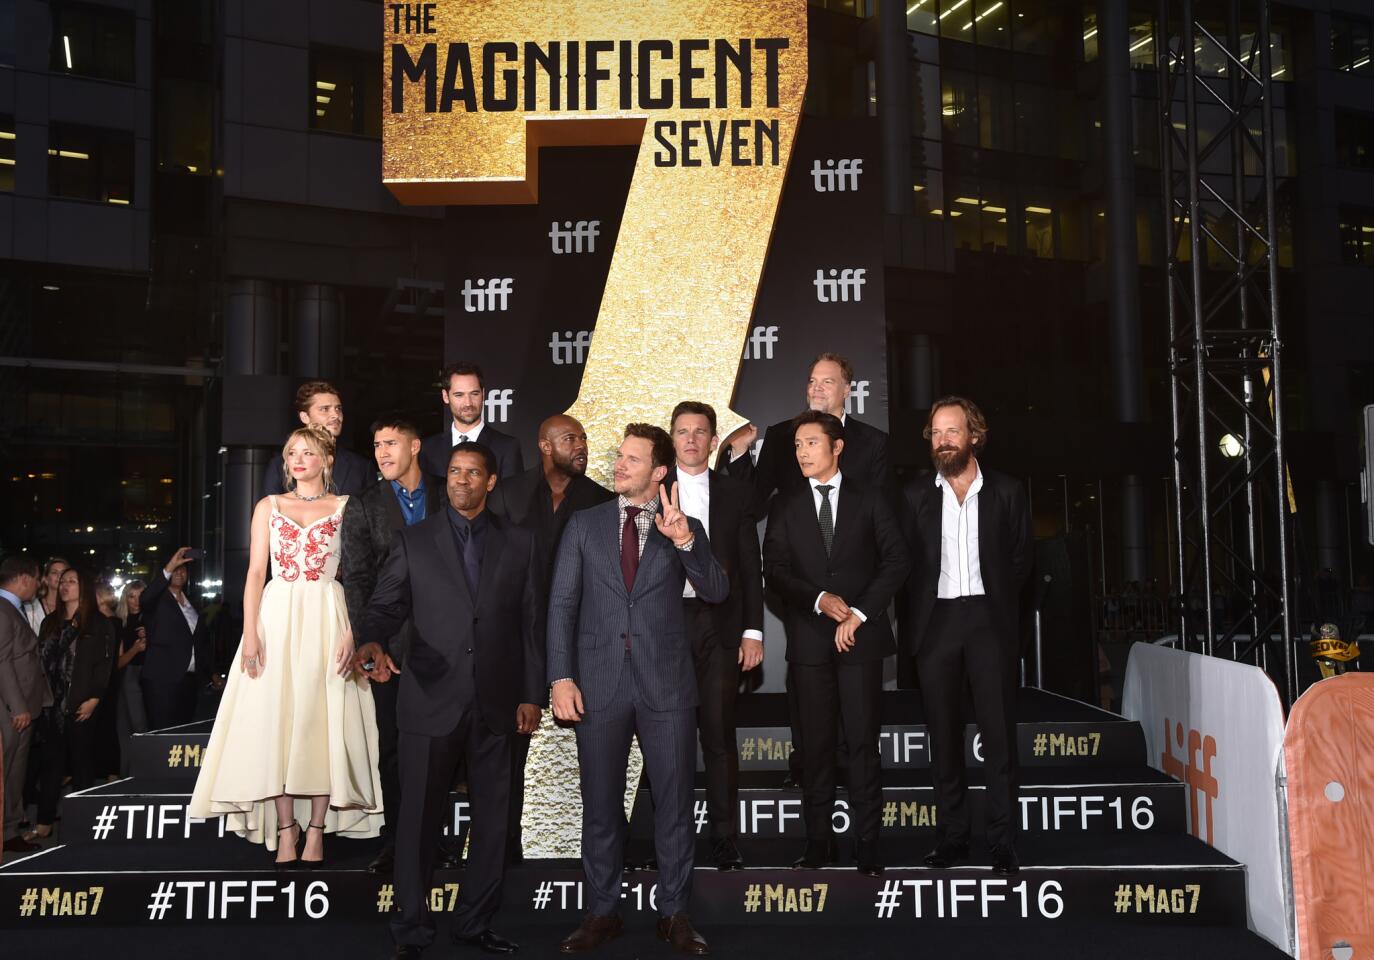 Lucas Grimes, back row from left, Manuel Garcia-Rulfo, Vincent D'Onofrio; center row from left, Haley Bennett, Martin Sensmeier, Antoine Fuqua, Ethan Hawke, Byung-hun Lee, Peter Sarsgaard; and front row from left, Denzel Washinton and Chris Pratt attend "The Magnificent Seven" premiere on Day 1 of the Toronto International Film Festival at the Roy Thomson Hall in Toronto.